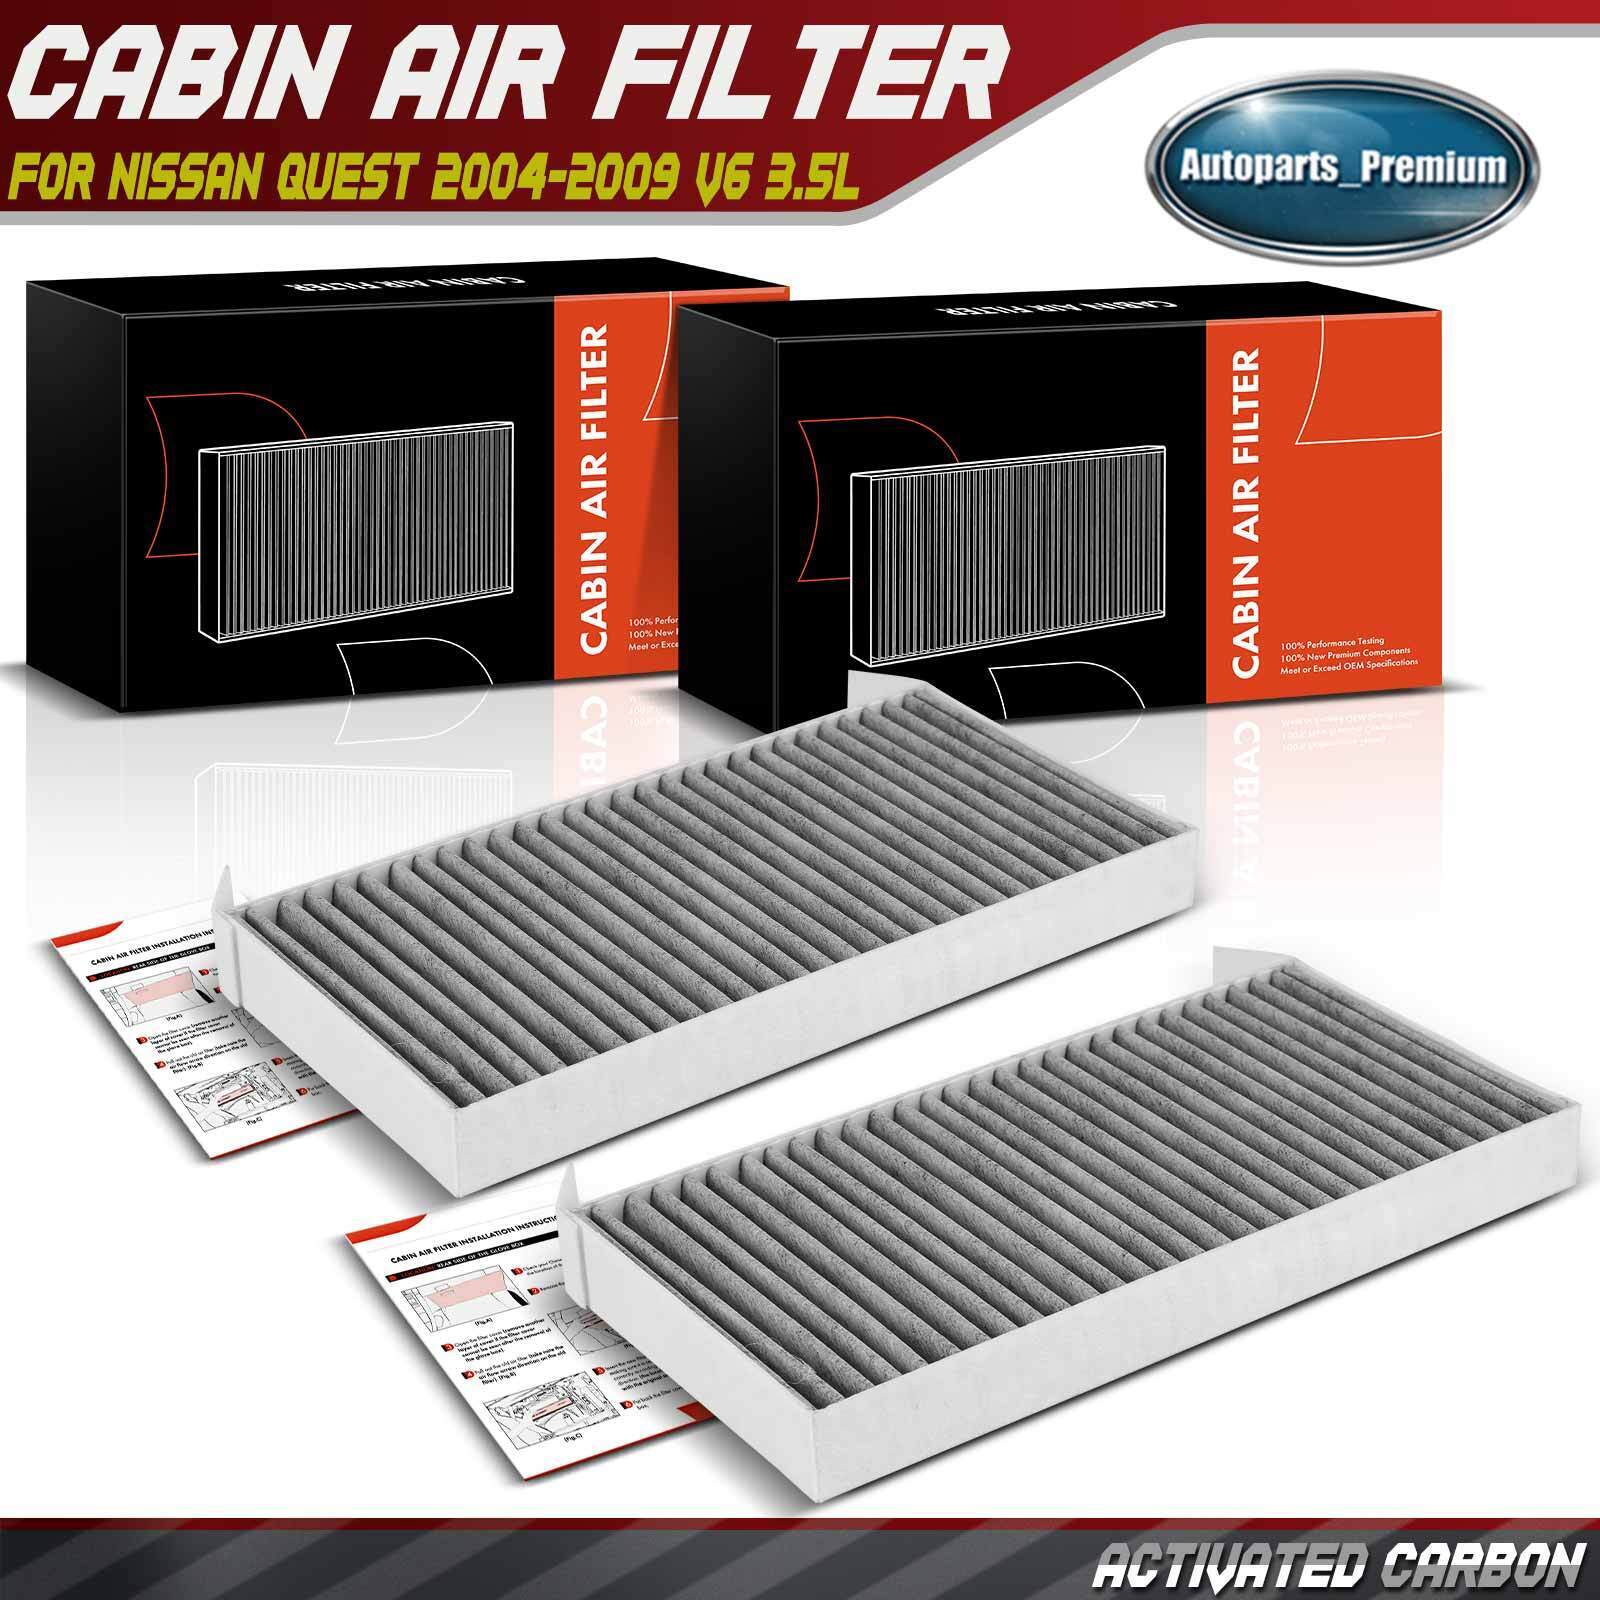 2x Activated Carbon Cabin Air Filter for Nissan Quest 2004-2009 Behind Glove Box